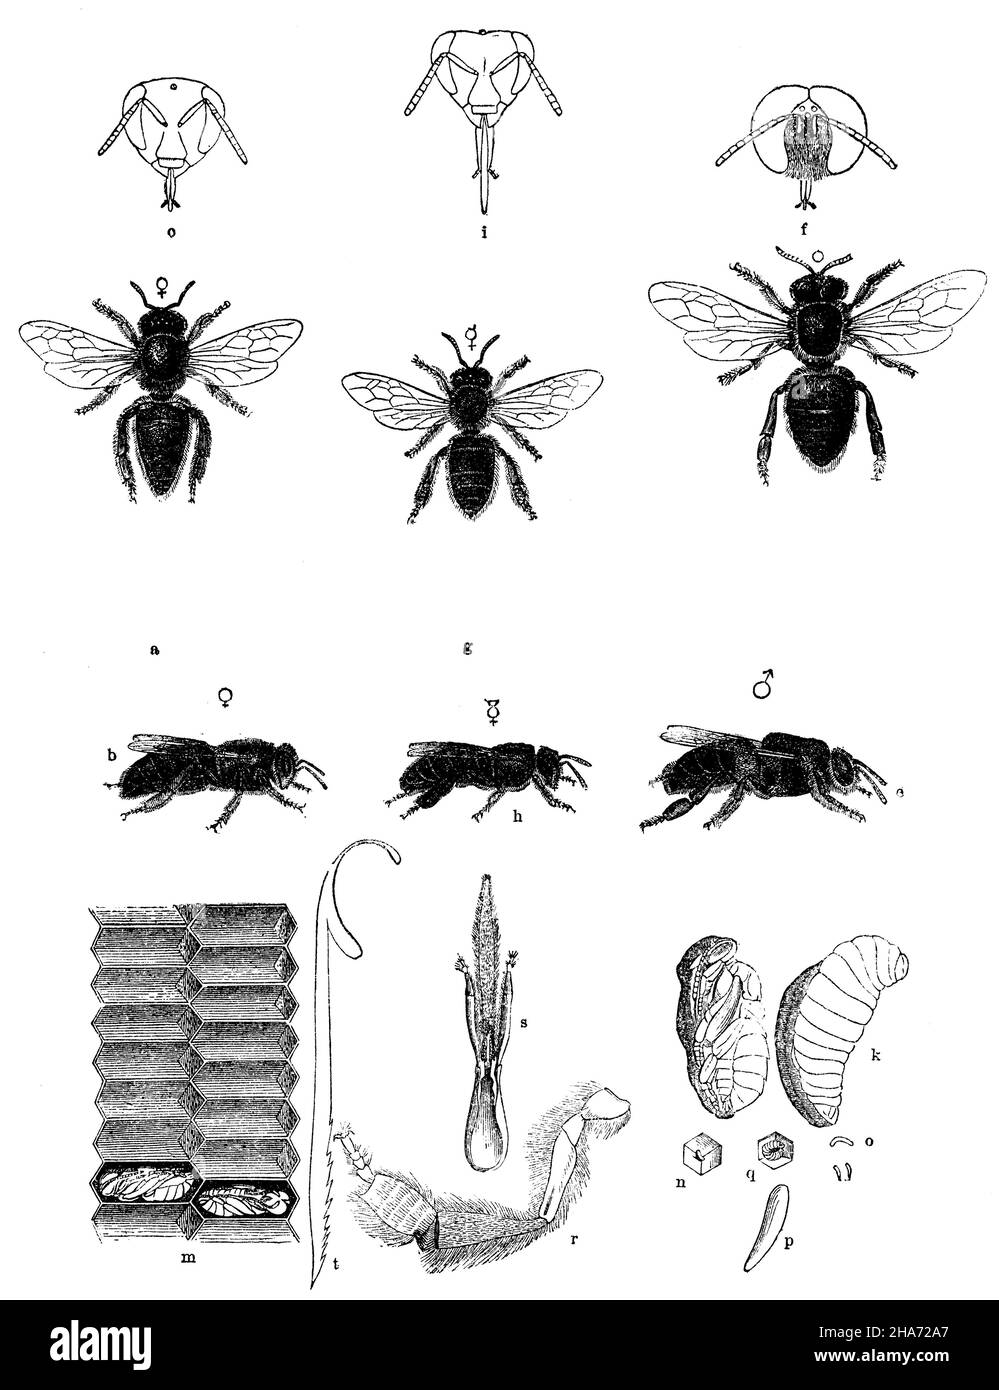 Honey bee. a, b) female, c) head, d, e) male, f) head, g, h) asexual bee, i) head, k) larva, l) pupa, m) cells cut through, pupae in two cells, n) bottom of a cell with the egg, o) eggs, p) egg greatly enlarged, q) bottom of cell with a young larva, r) hind leg of a worker, s) lower lip (tongue, palpi, hollowed chin) t)stinger, ,  (zoology book, 1872) Stock Photo